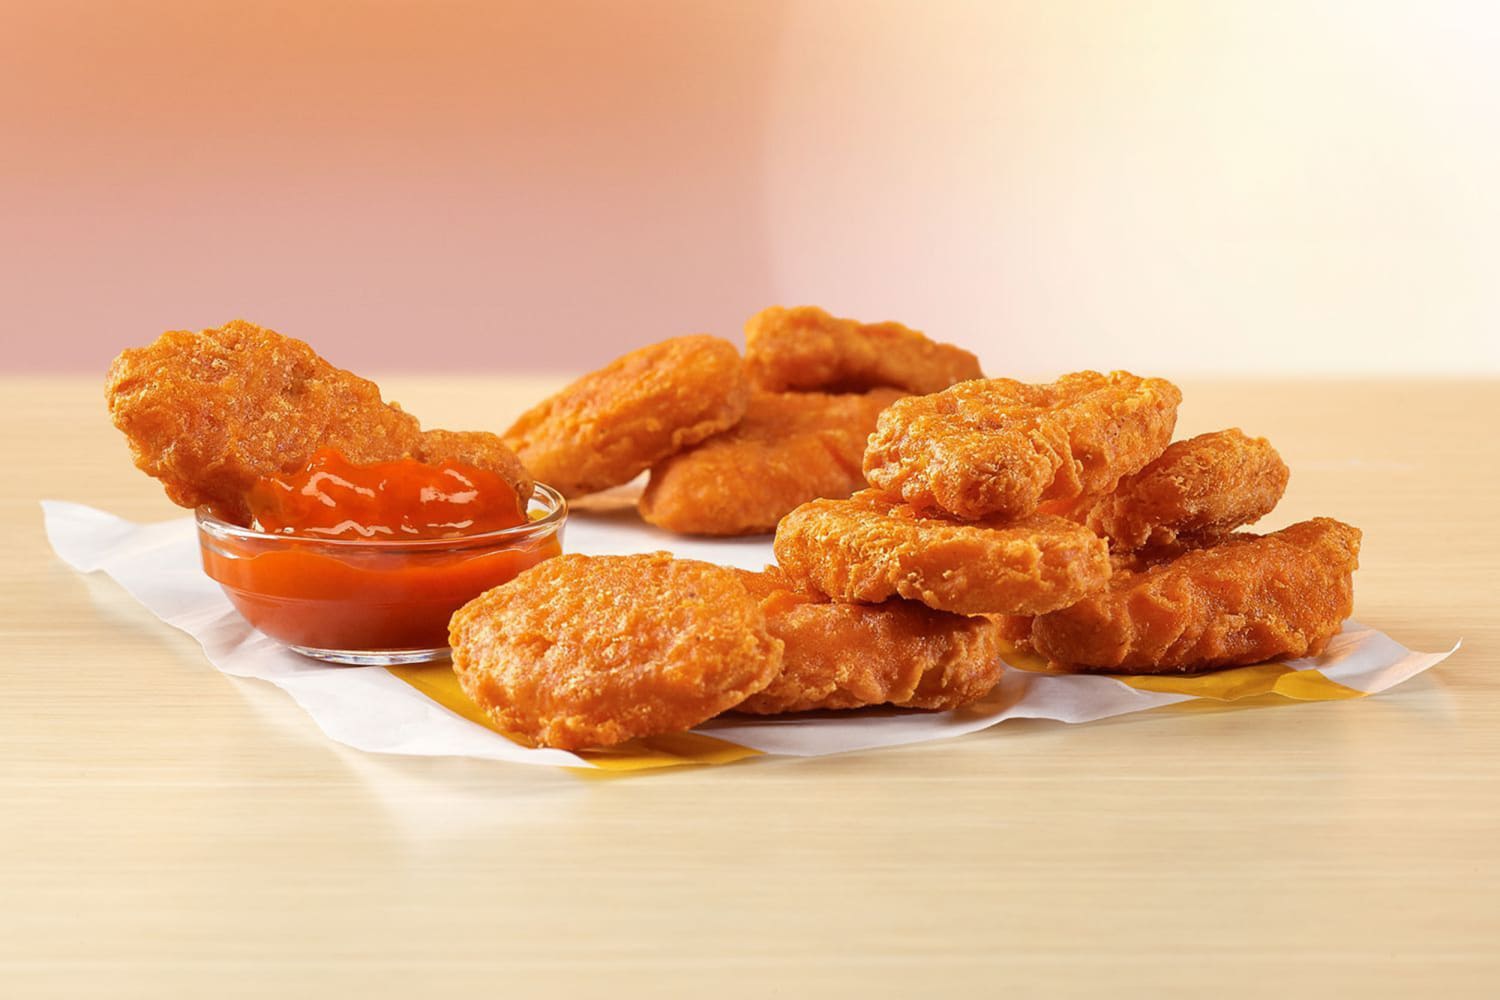 McDonald's spices up its menu with the return of fan-favorite item